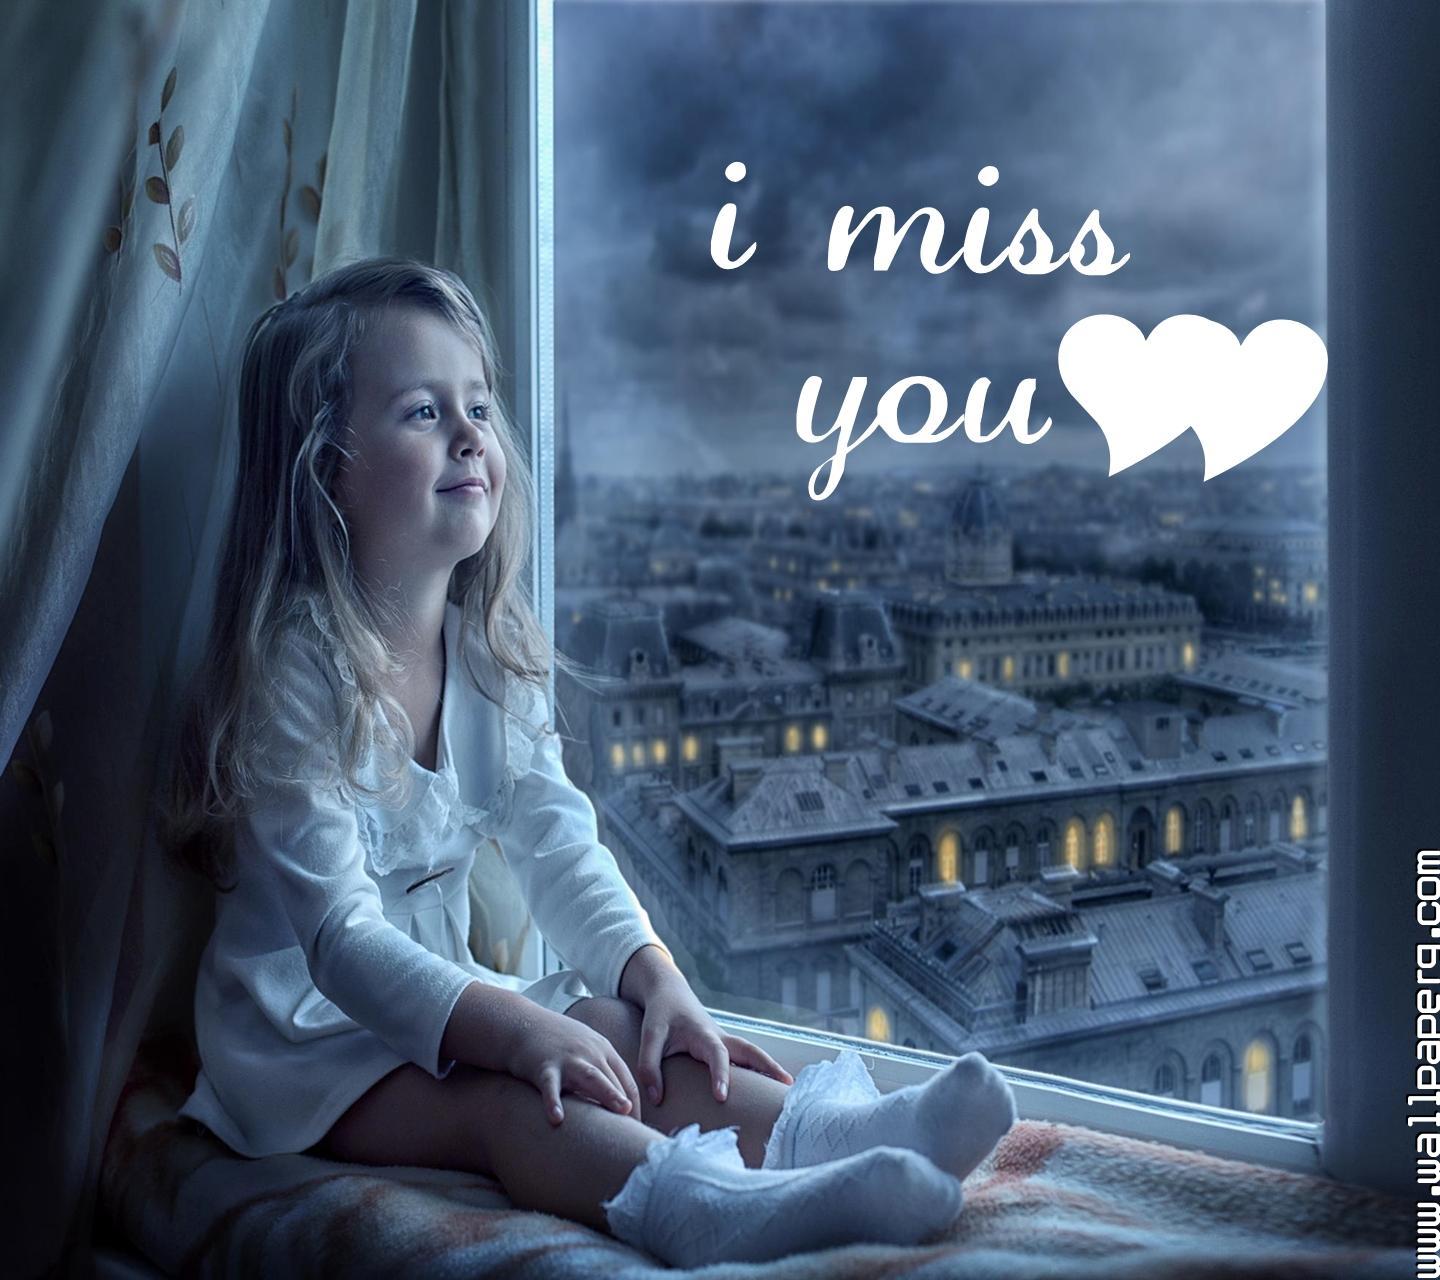 Download I miss you(2) - Miss you hd wallpapers- For Mobile Phone